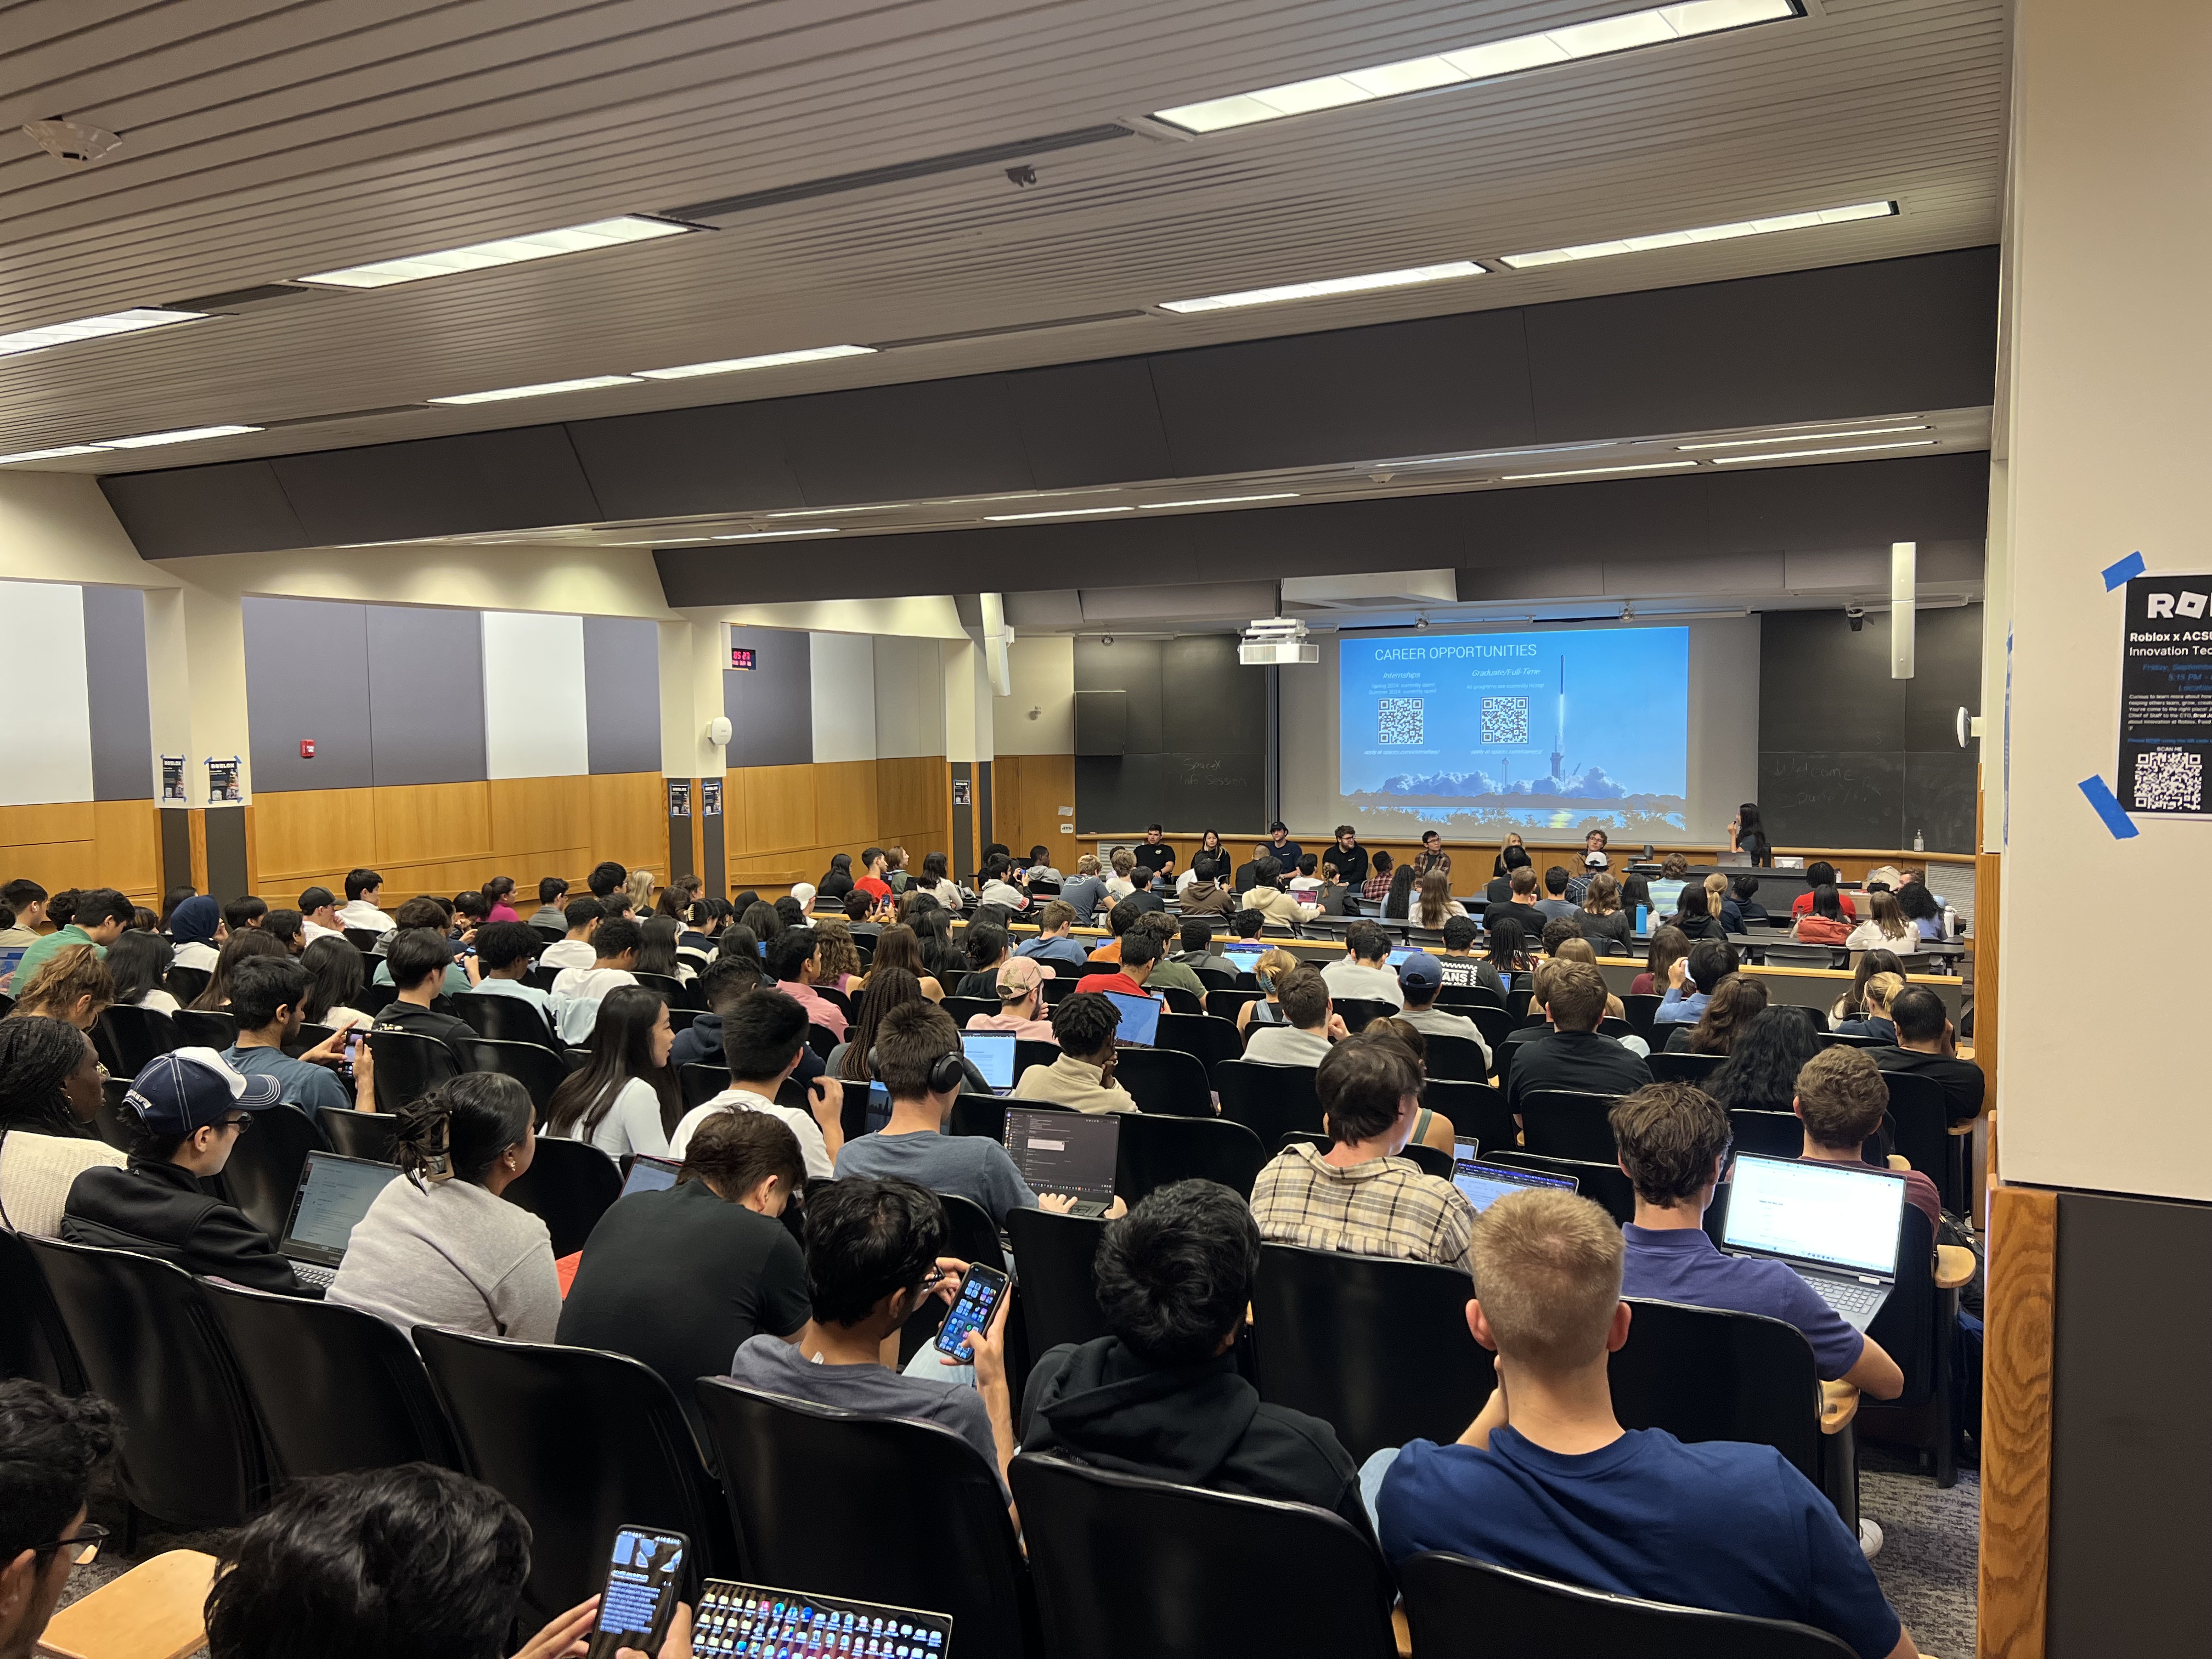 This image slider contains images of NSBE-CU's SpaceX Information Session. The first image of this slider displays an image, taken from the back of the lecture hall in which the event took place, of the congregation of Cornell students facing a panel of SpaceX recruiters.